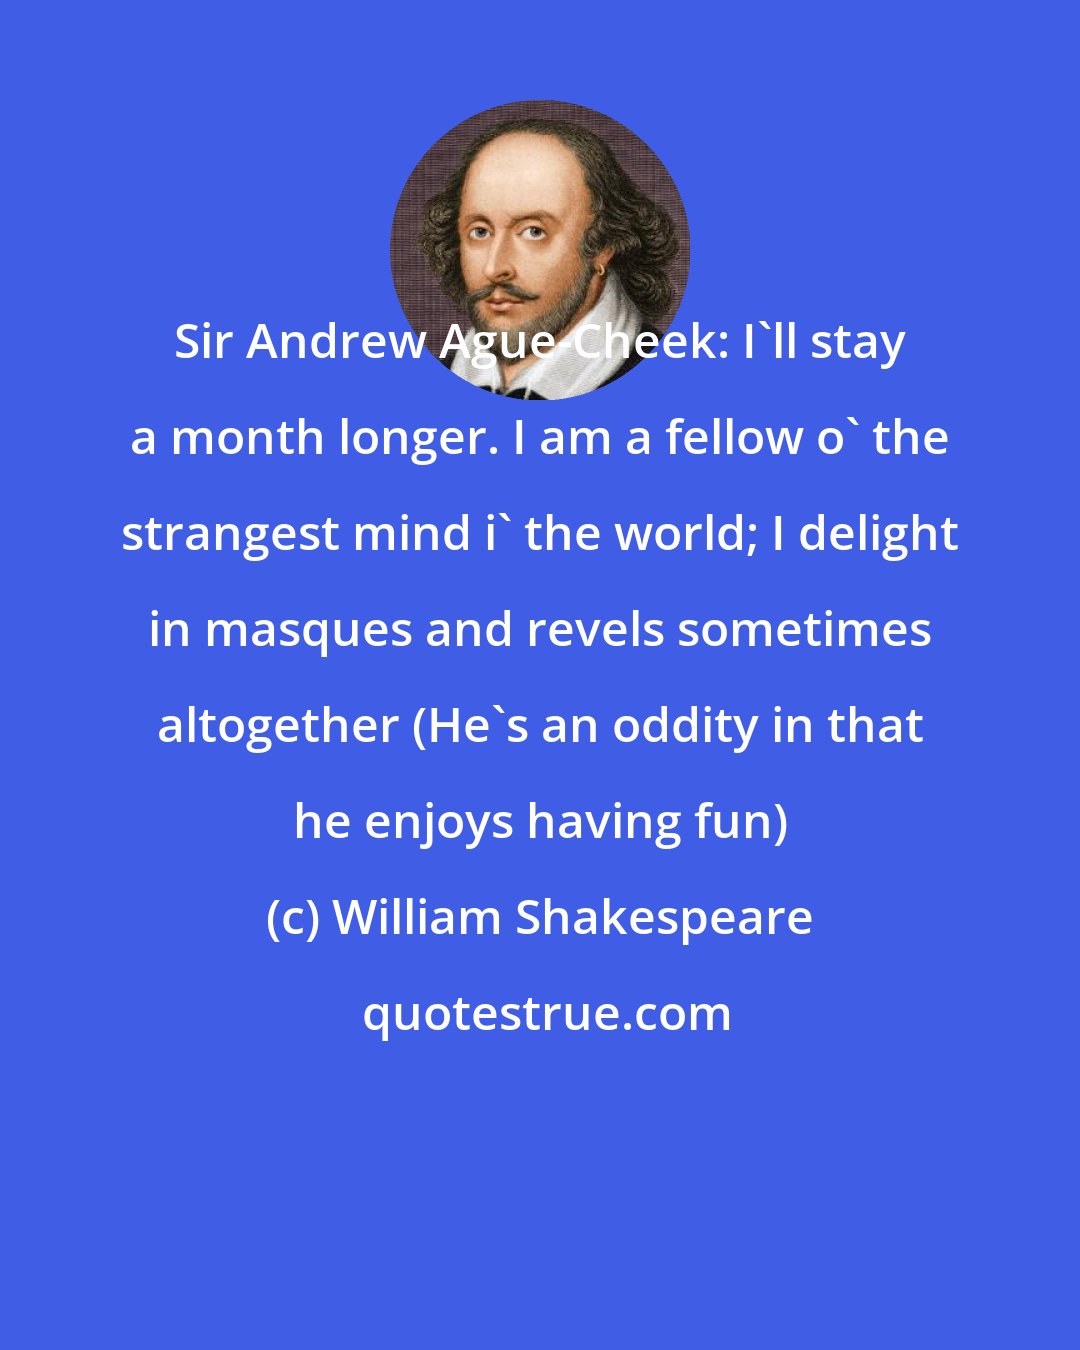 William Shakespeare: Sir Andrew Ague-Cheek: I'll stay a month longer. I am a fellow o' the strangest mind i' the world; I delight in masques and revels sometimes altogether (He's an oddity in that he enjoys having fun)